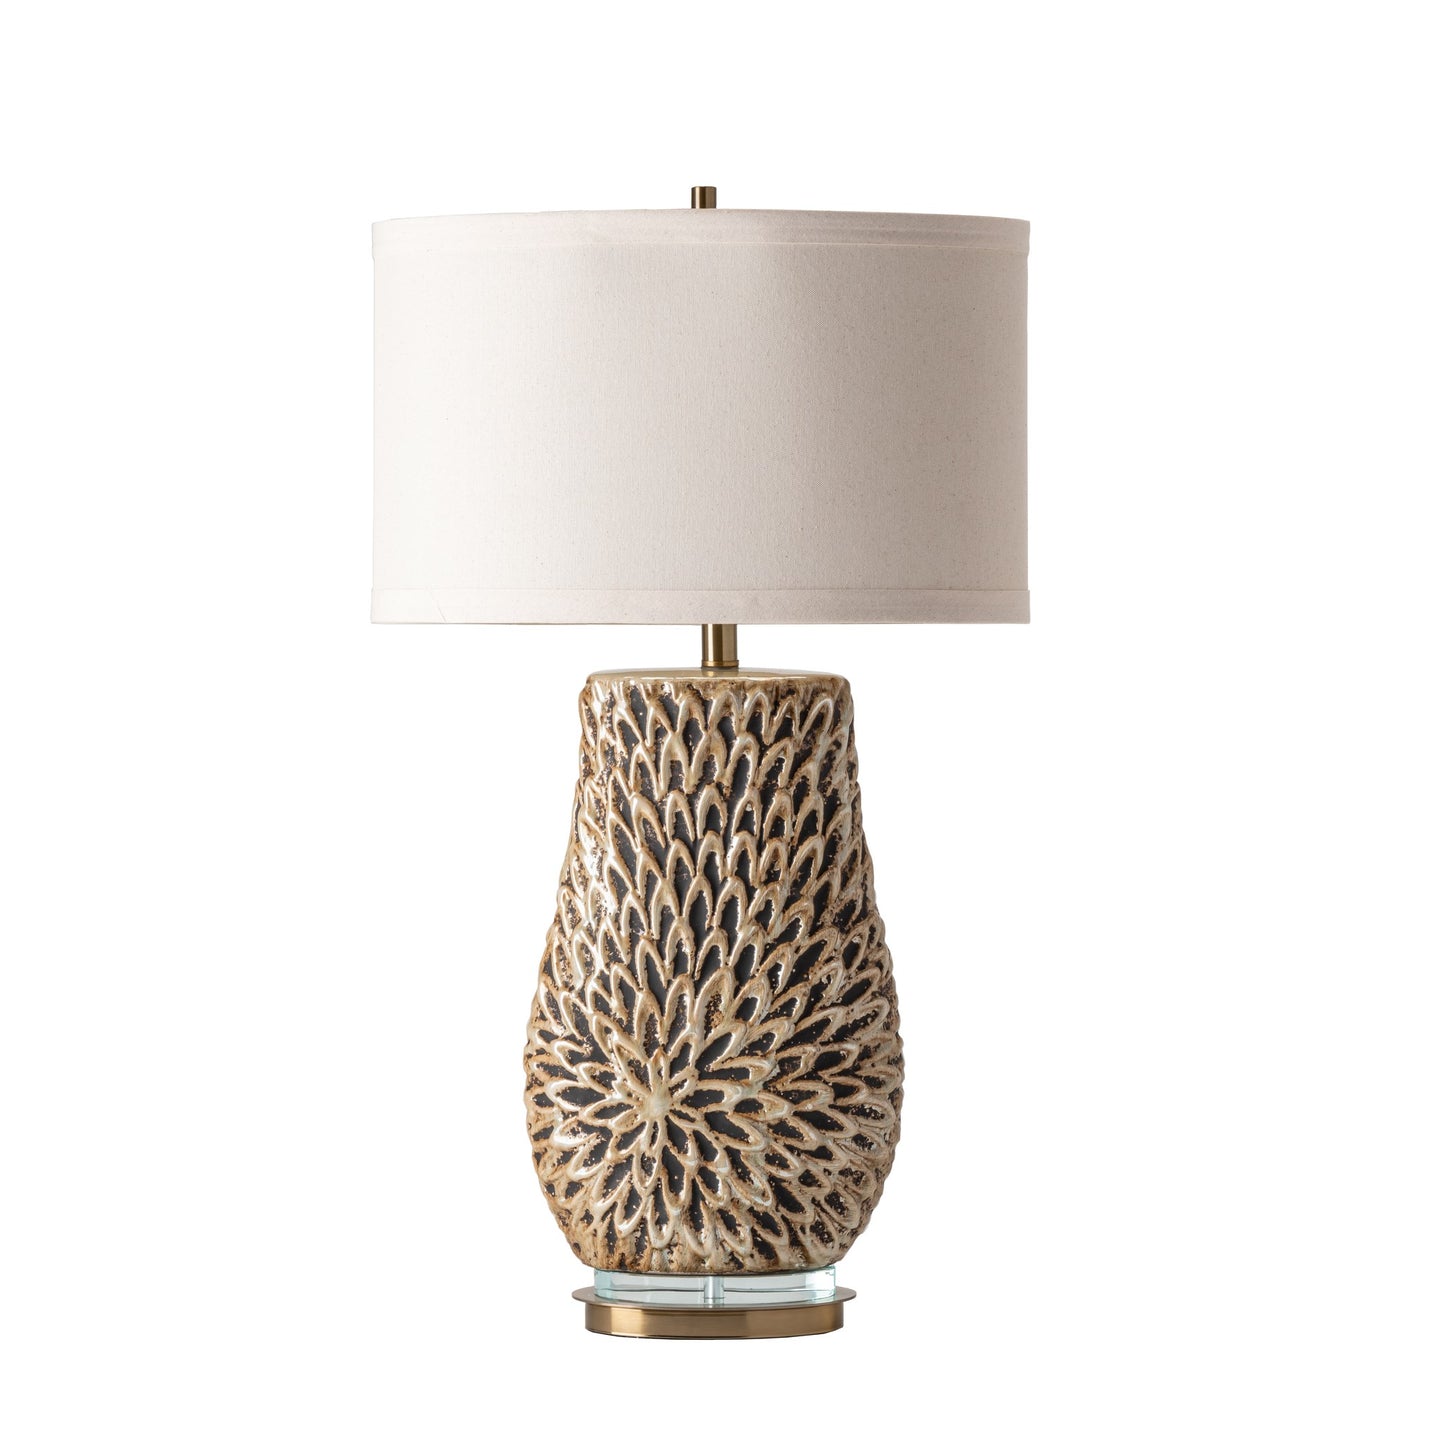 Floral & Gold Table Lamp